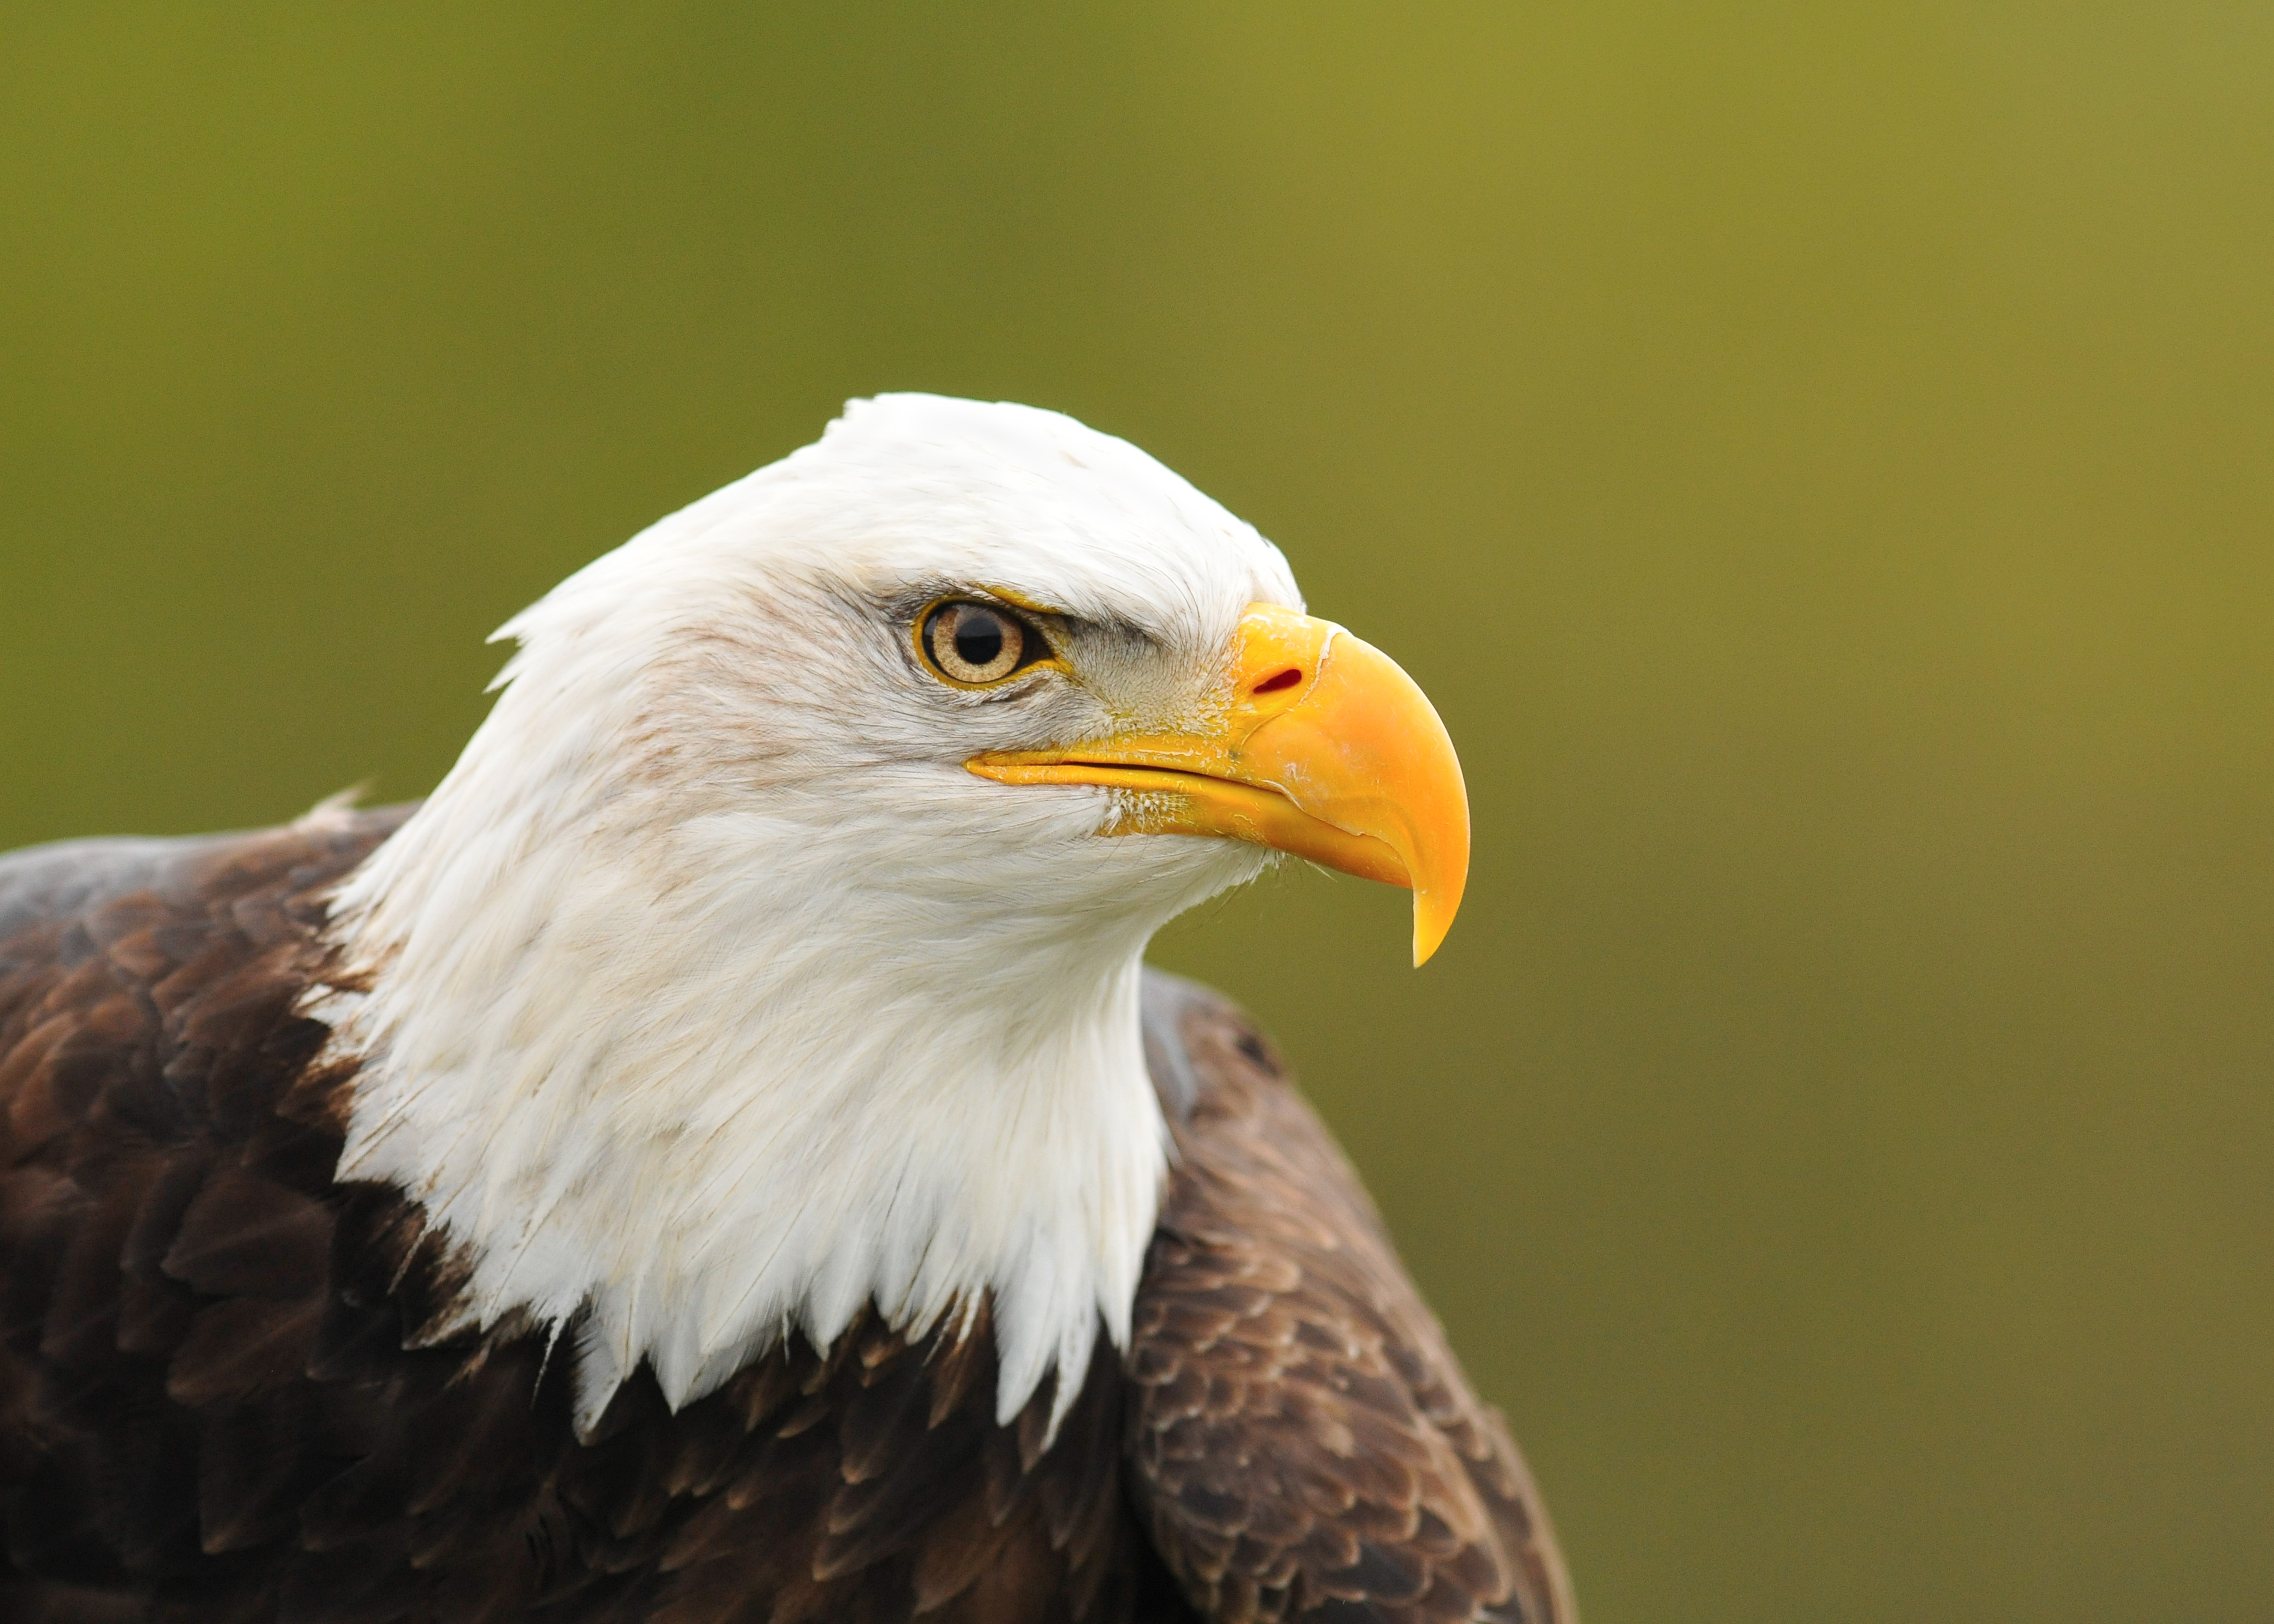 Why we love Bald Eagles | The rare Blog